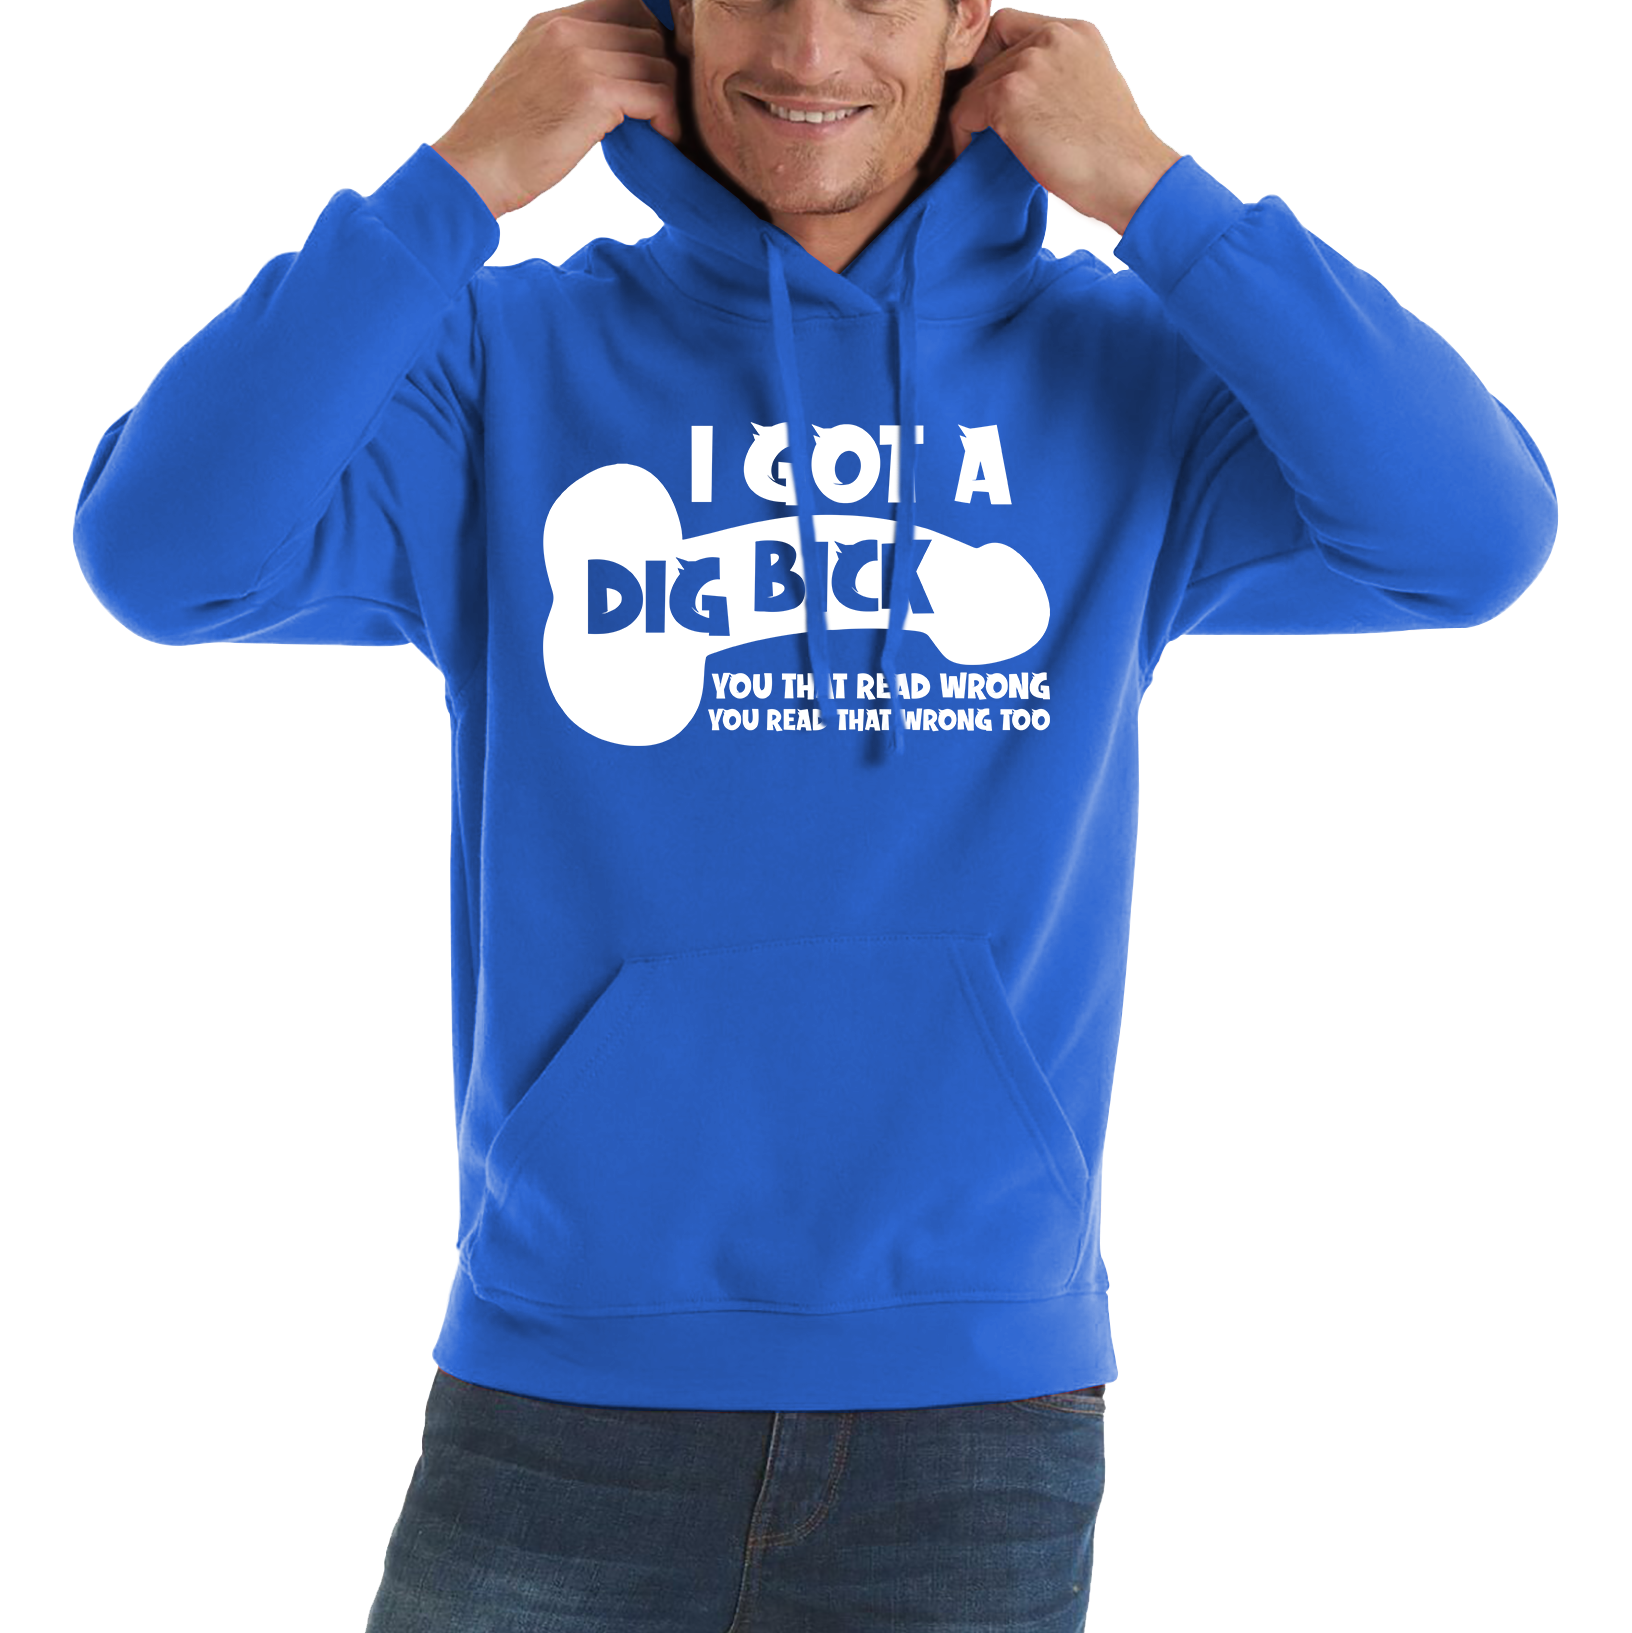 I Got A Dig Bick You That Read Wrong You Read That Wrong Too Funny Novelty Sarcastic Humour Unisex Hoodie